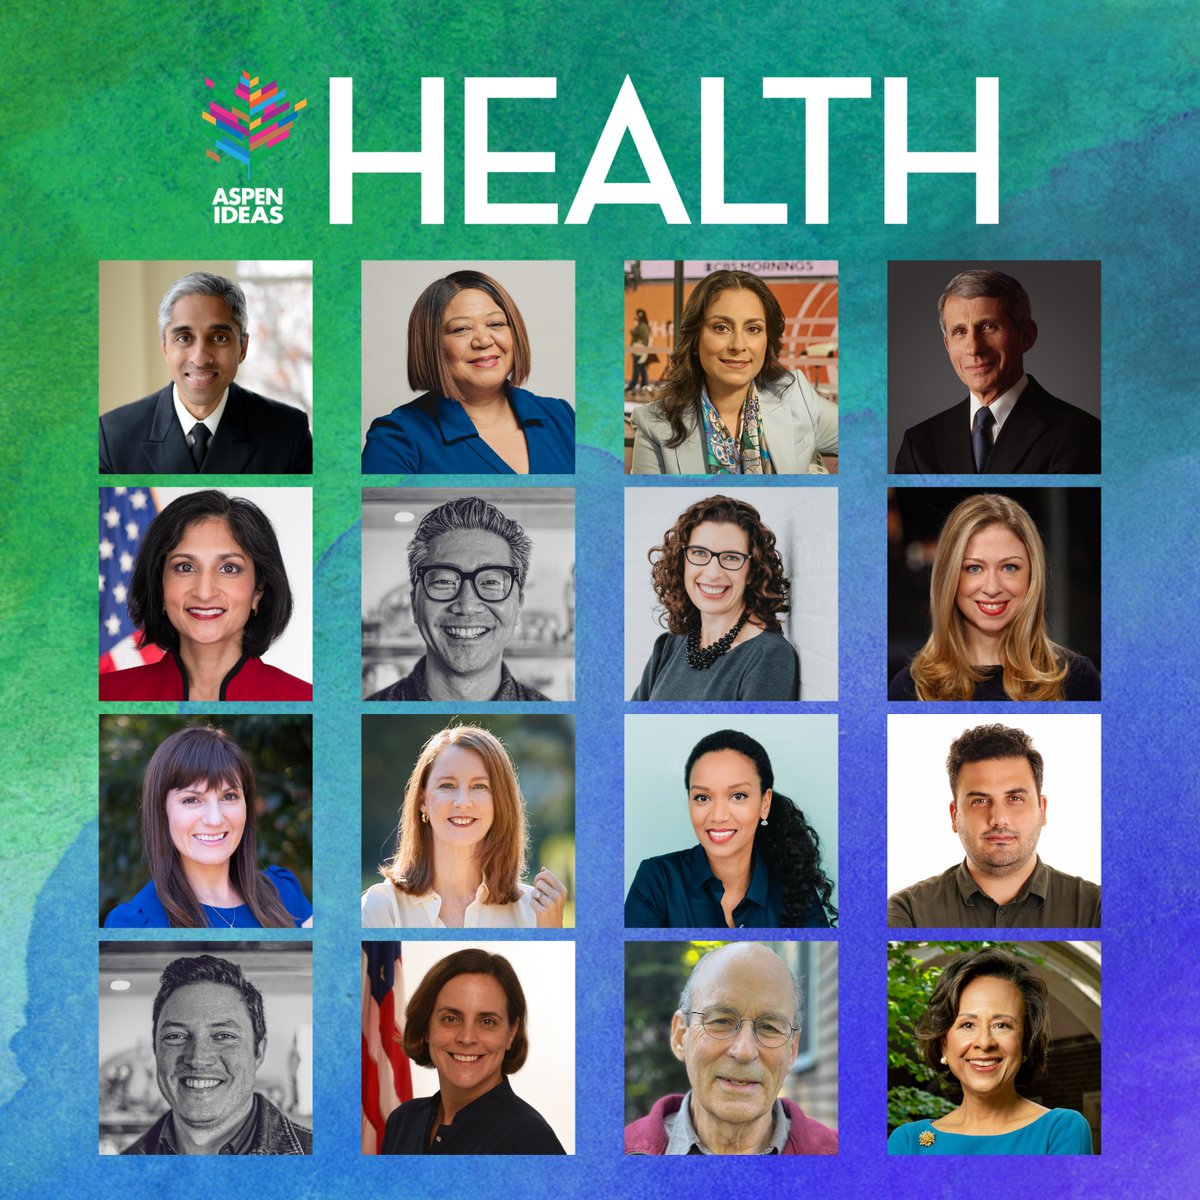 ⭐️ICYMI: Take a sneak peek at some of the big thinkers and innovative doers who will join us at #AspenIdeasHealth (June 21-24) to explore bold approaches to better health for all: bit.ly/AIHSpeakerPrev…